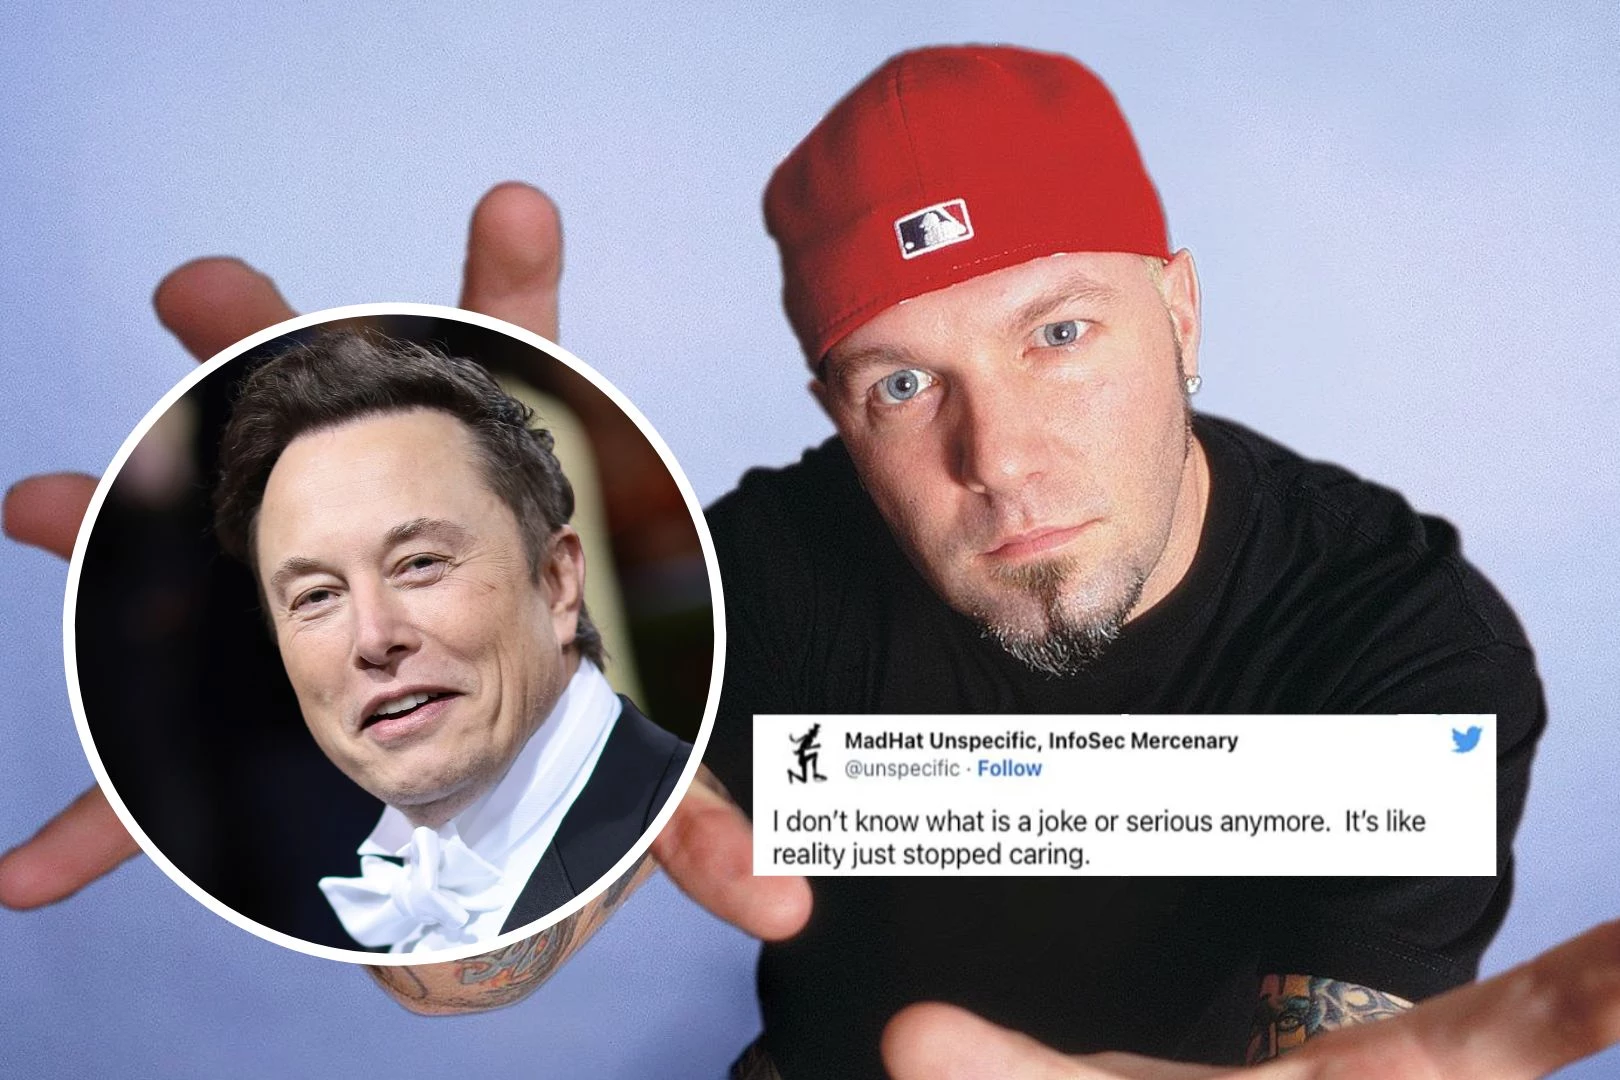 Fred Durst Offers to Have Limp Bizkit Help Elon Musk With Twitter